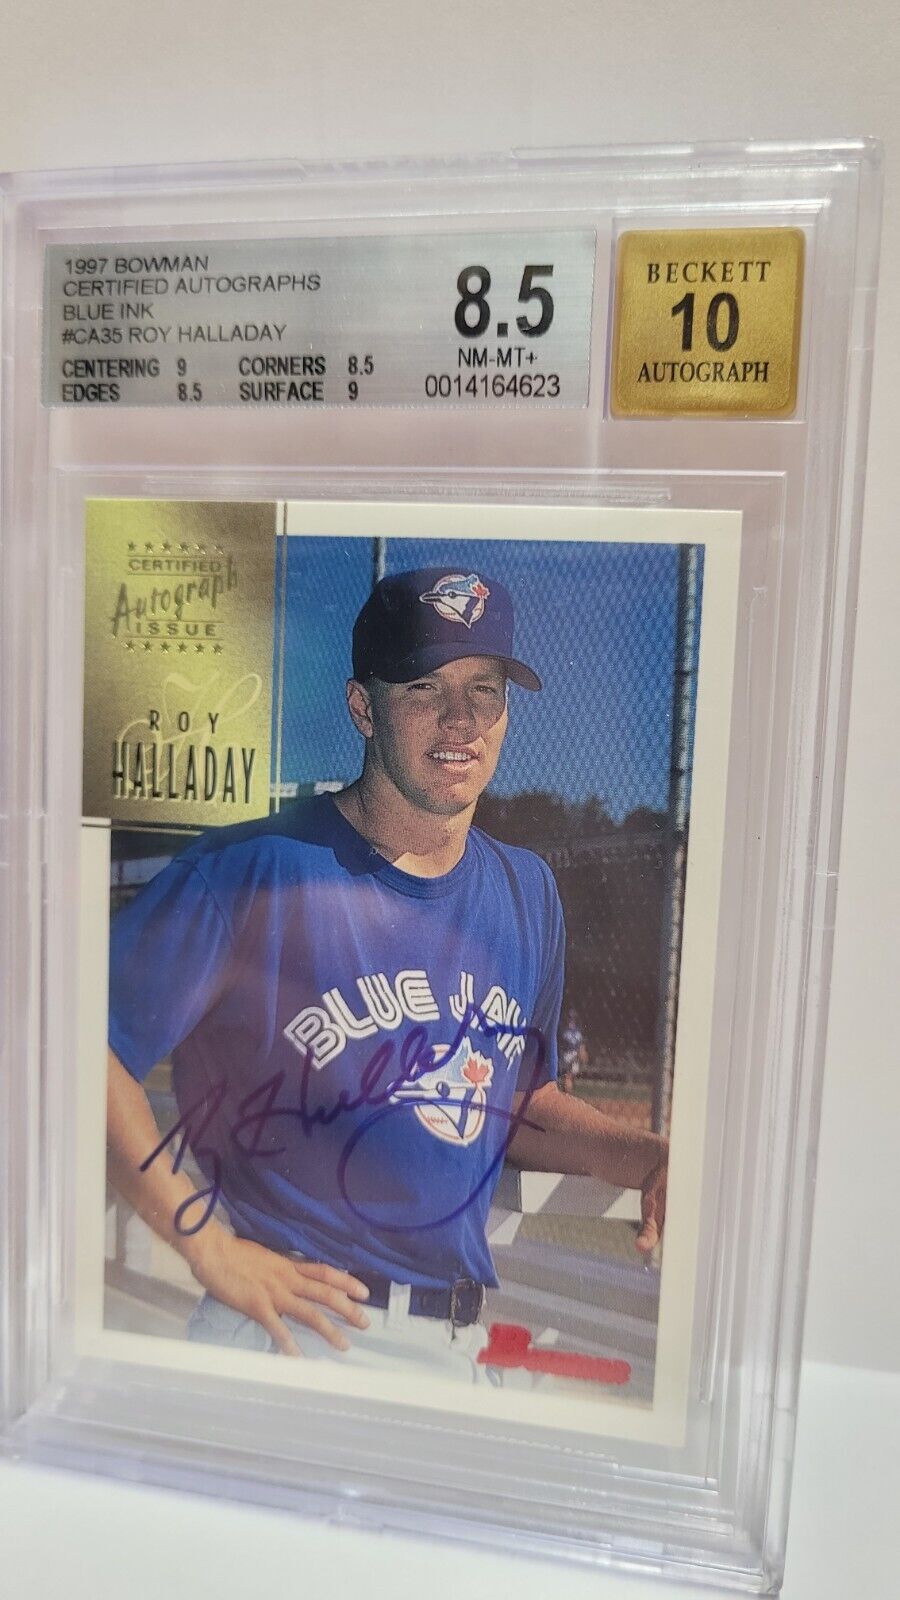 Beckett 10 Auto & 8.5 NM-MT+ Graded Card & 1997 Bowman Autographed Roy Halladay